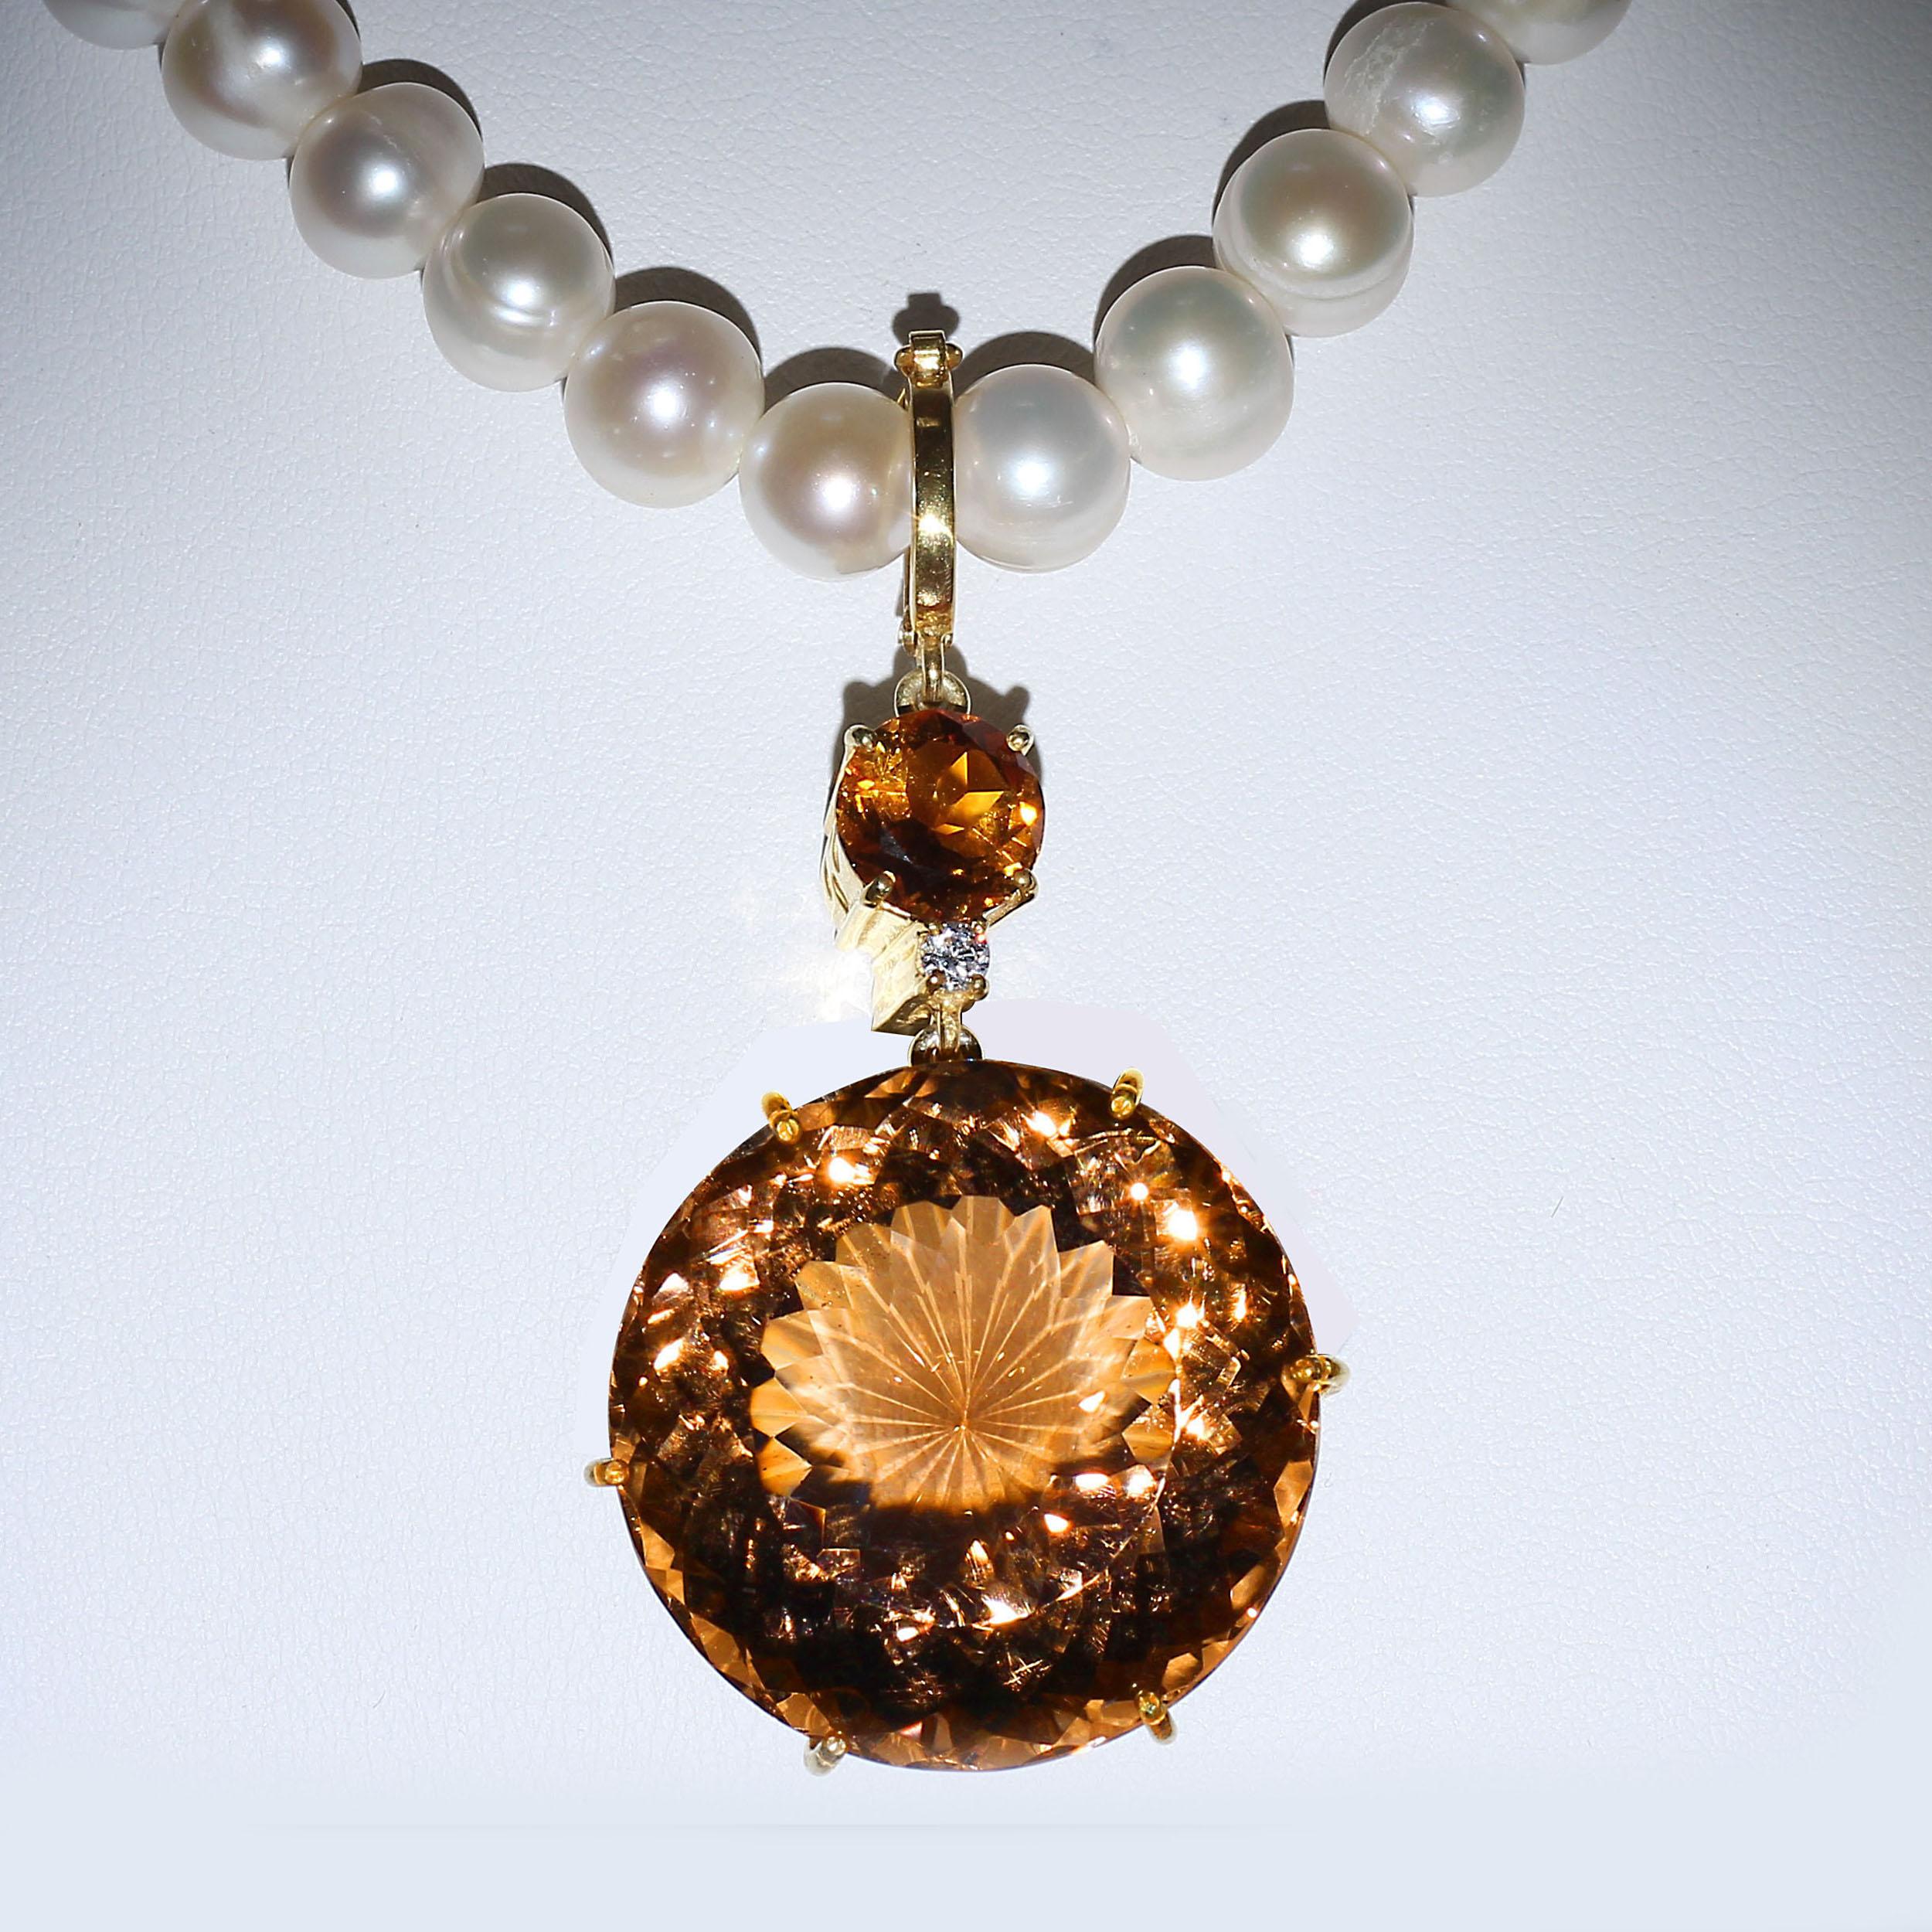 Eye popping pendant of huge, round Smoky Quartz accented with a sparkling Citrine and Cambodian Zircon. This gorgeous pendant is just perfect for Fall. Gorgeous Smoky Quartz, sparkling Citrine, what's not to love? The gemstones sit in their own hand